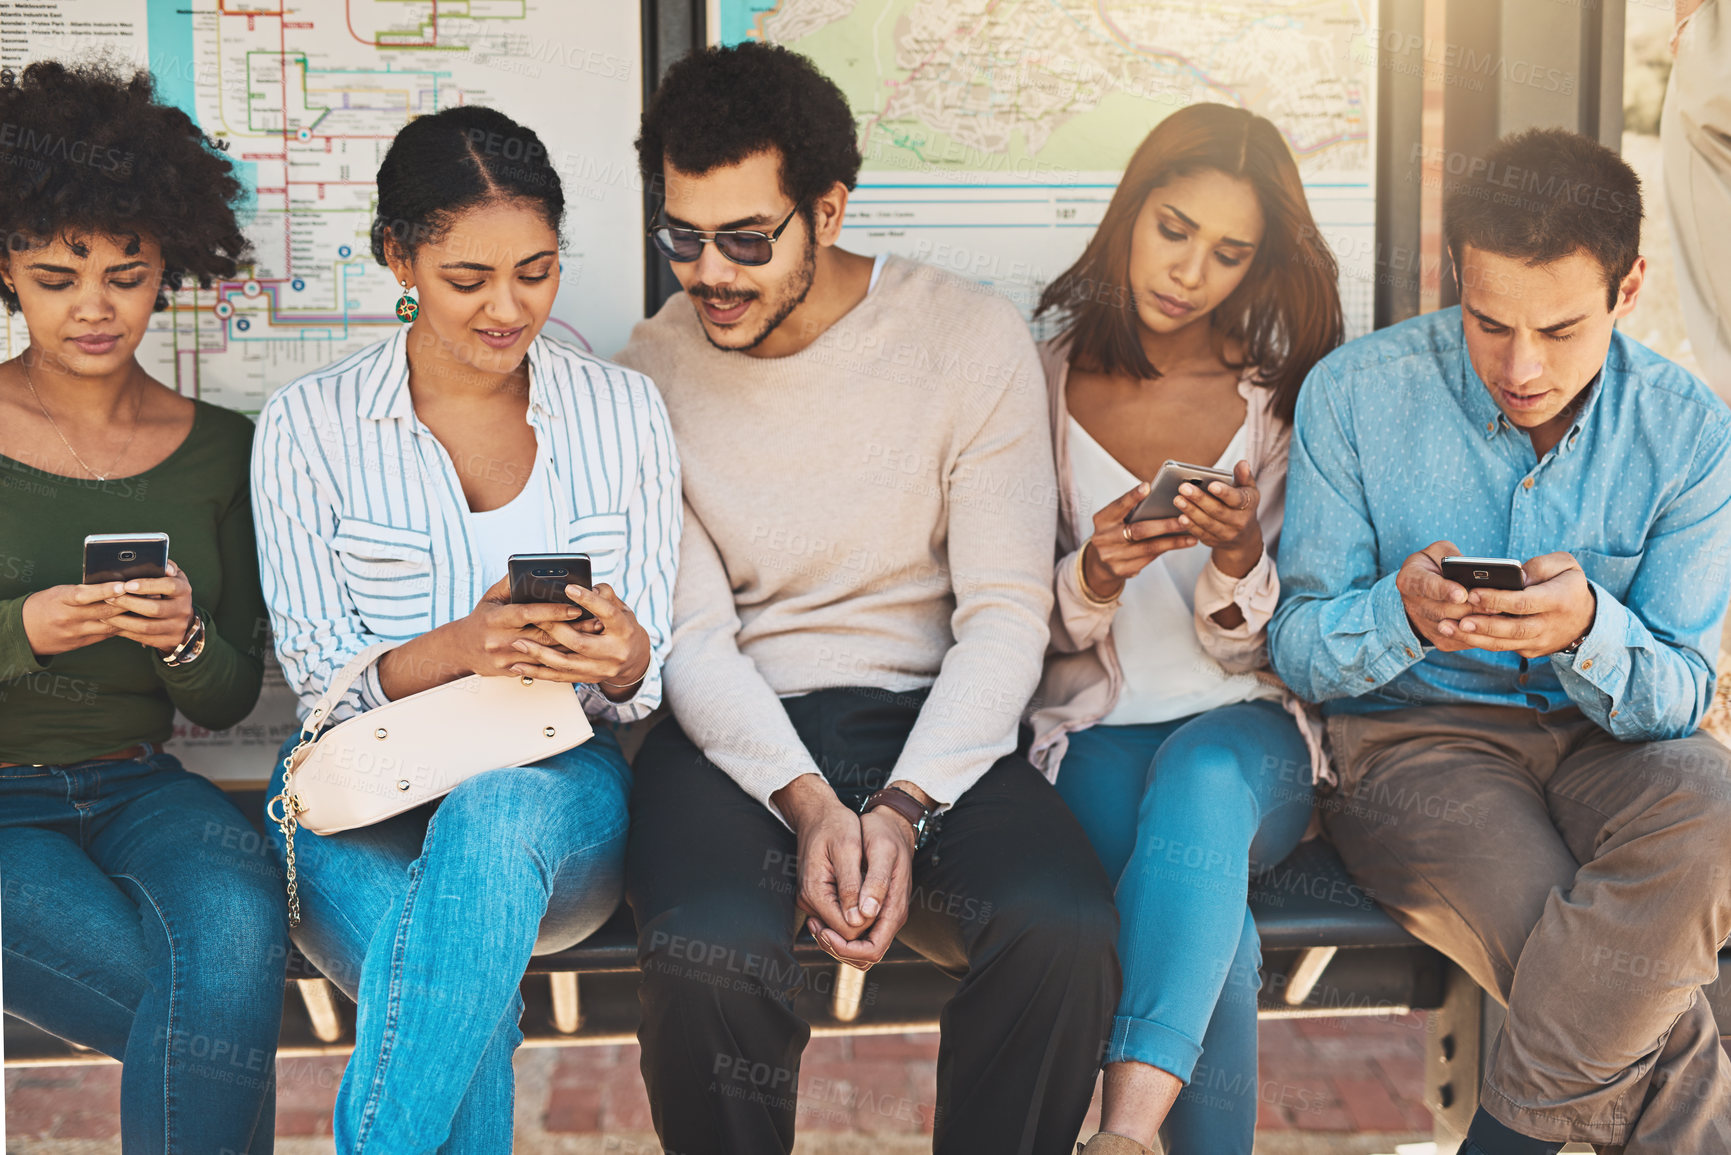 Buy stock photo Shot of a group of focused young friends seated next to each other while texting and browsing on their cellphones outside during the day